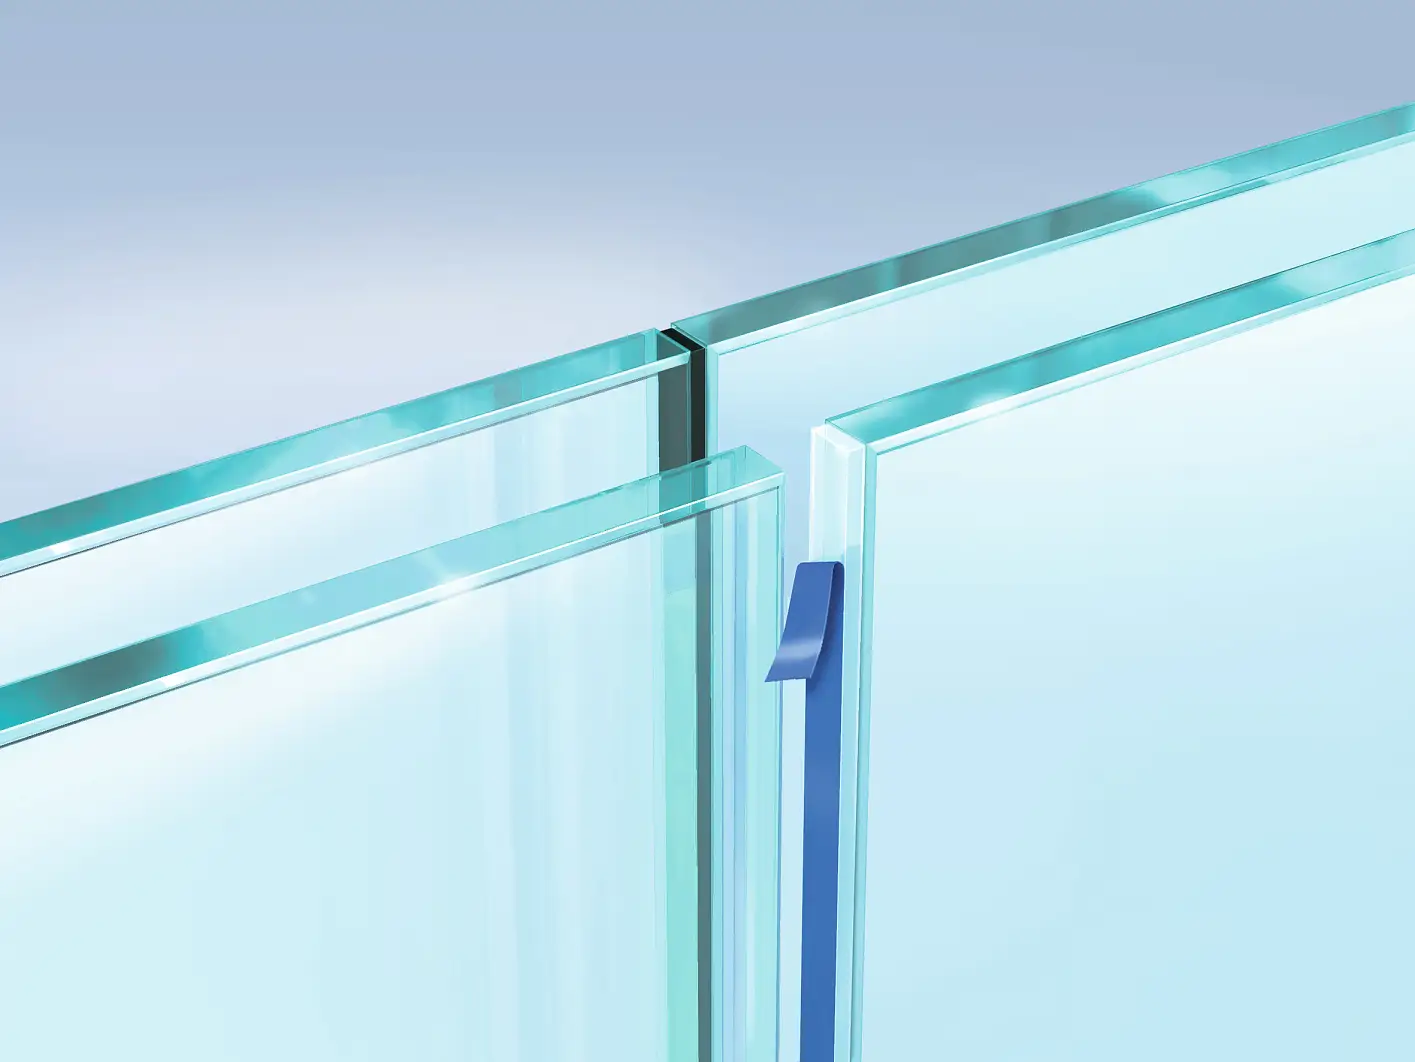 Bonding glass panels to one another